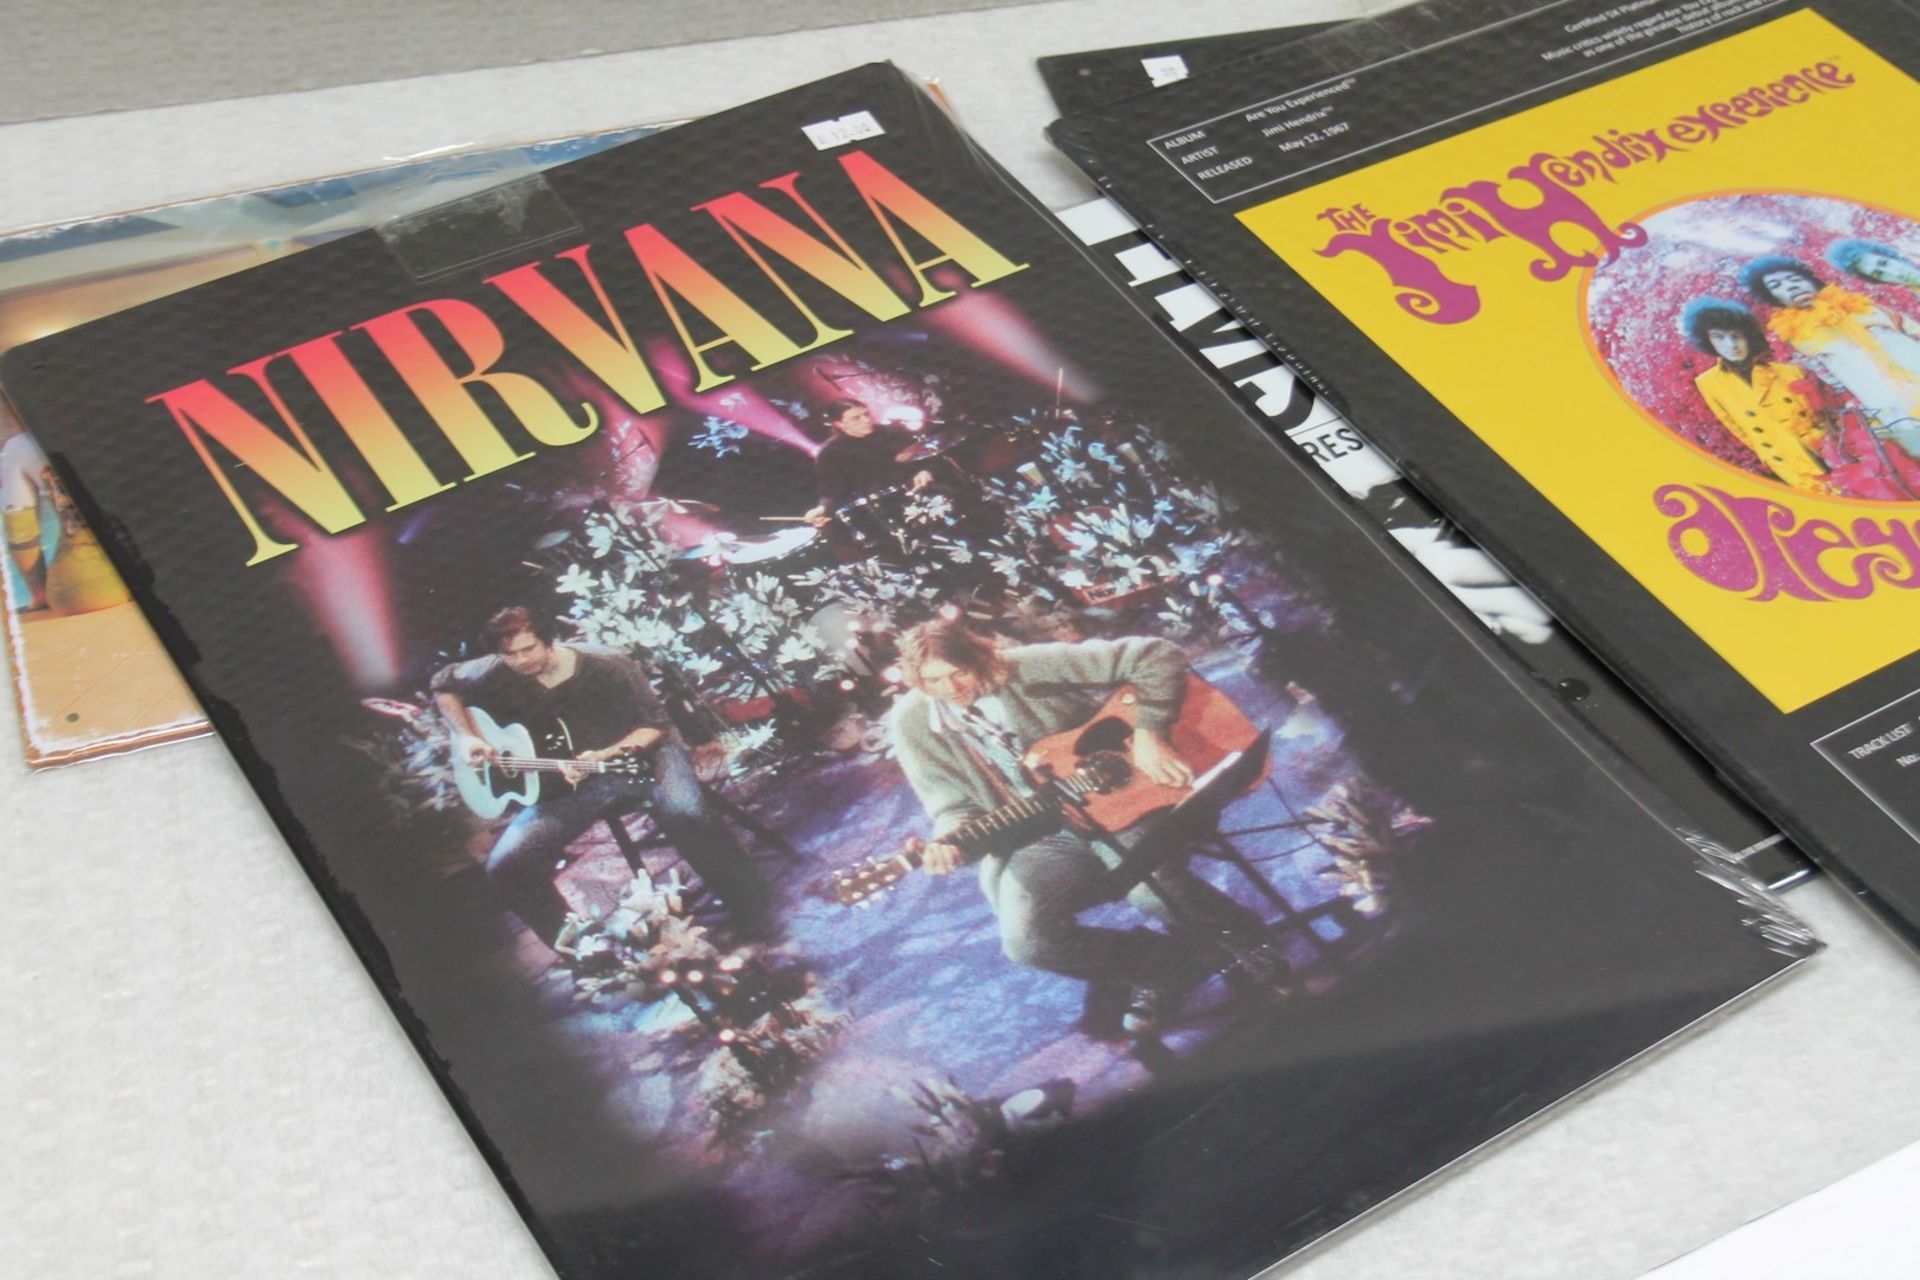 8 x Pieces of Rock n Roll Metal Wall Art - Size: 29x20cm & 40x28cm - Features Nirvana, Elvis, - Image 7 of 11